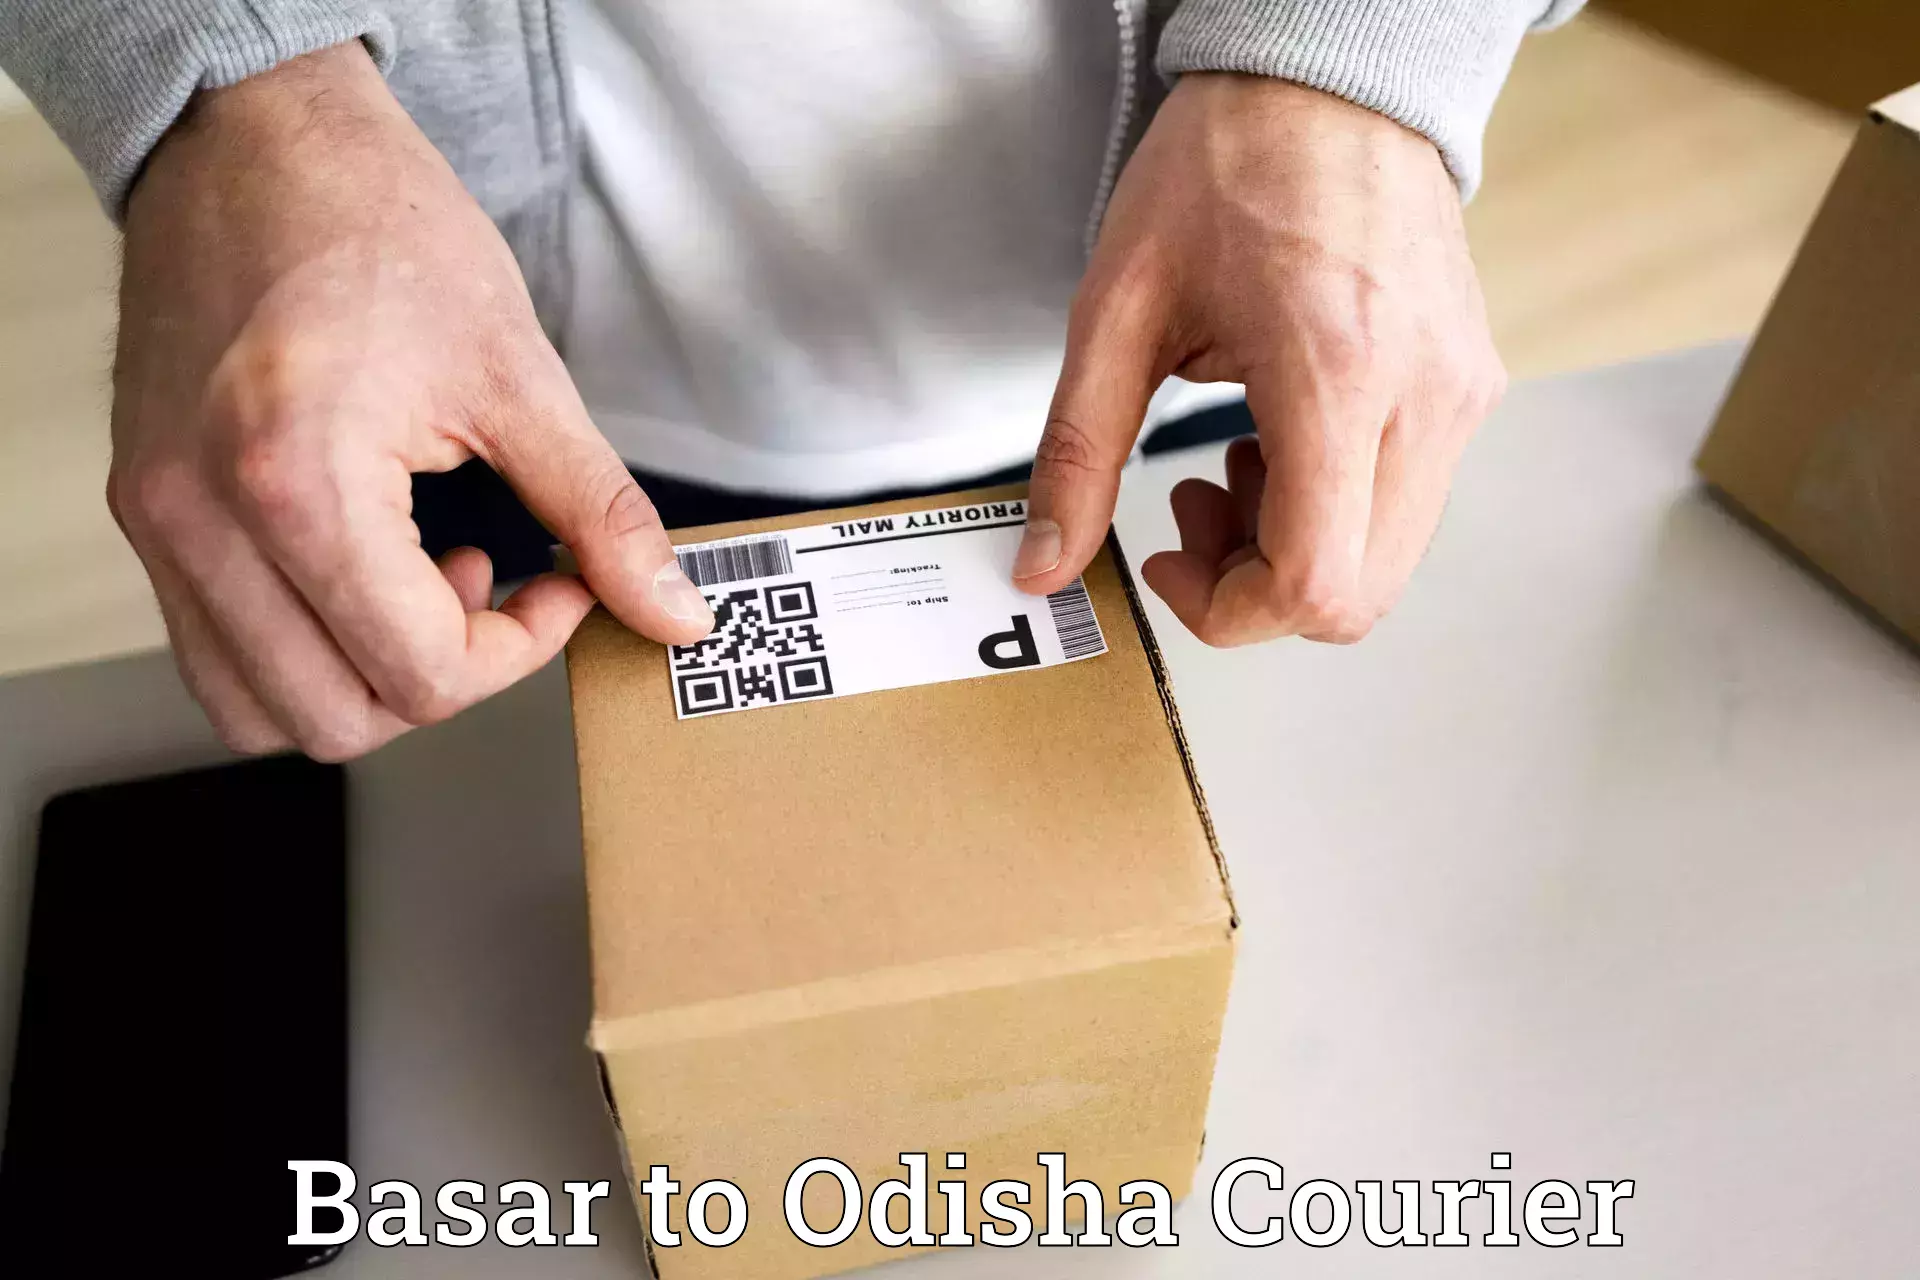 Courier service efficiency Basar to Odisha